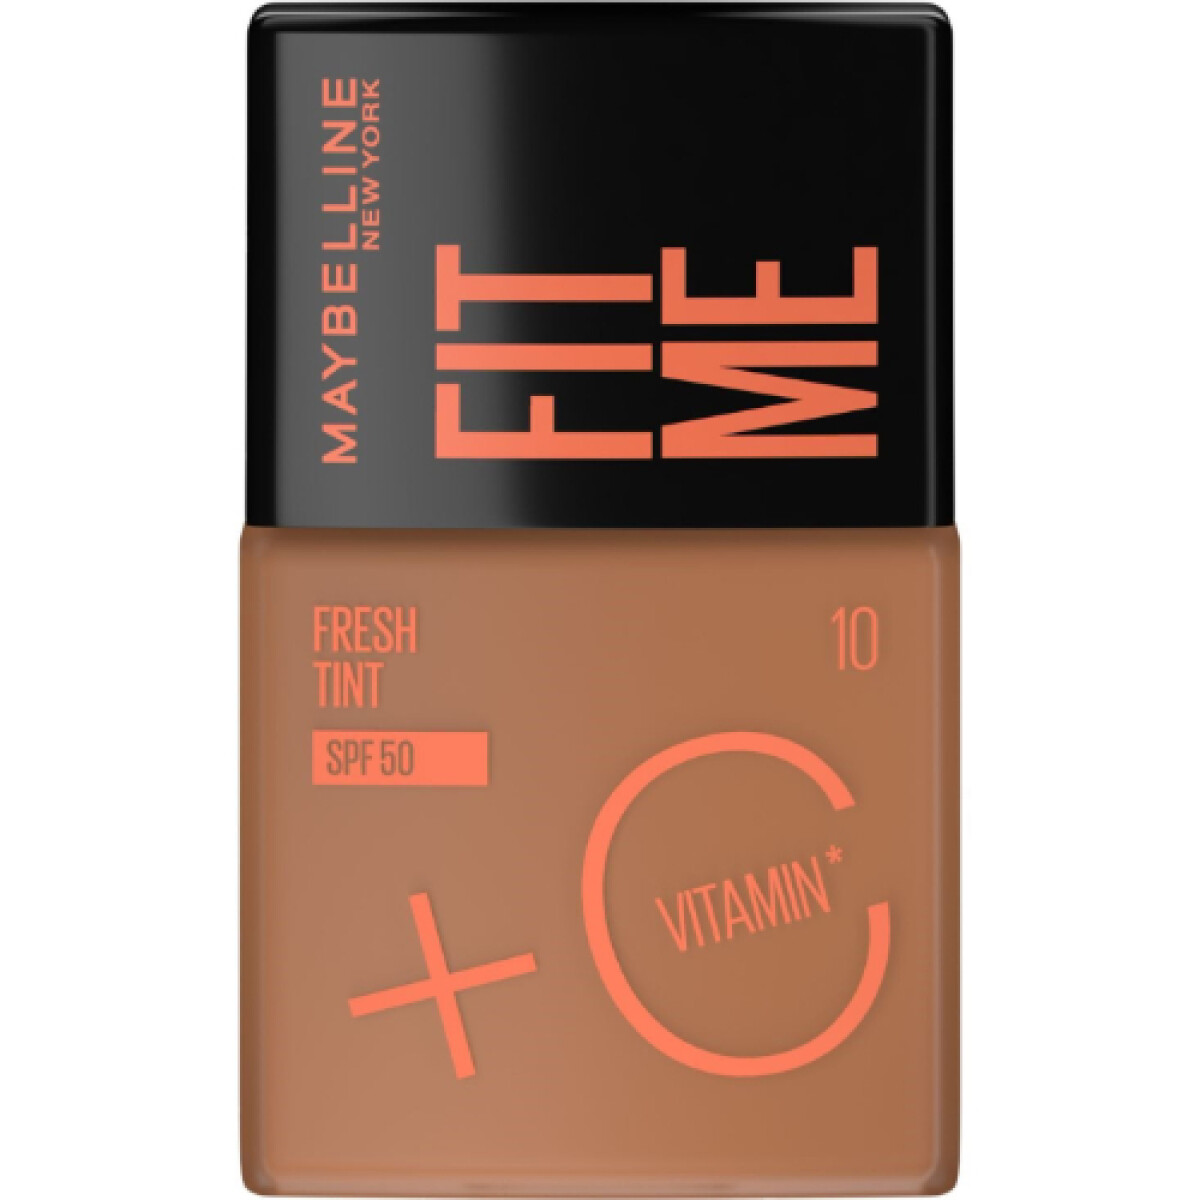 Base Maybelline Fit Me Fresh Tint SPF50 - 010 